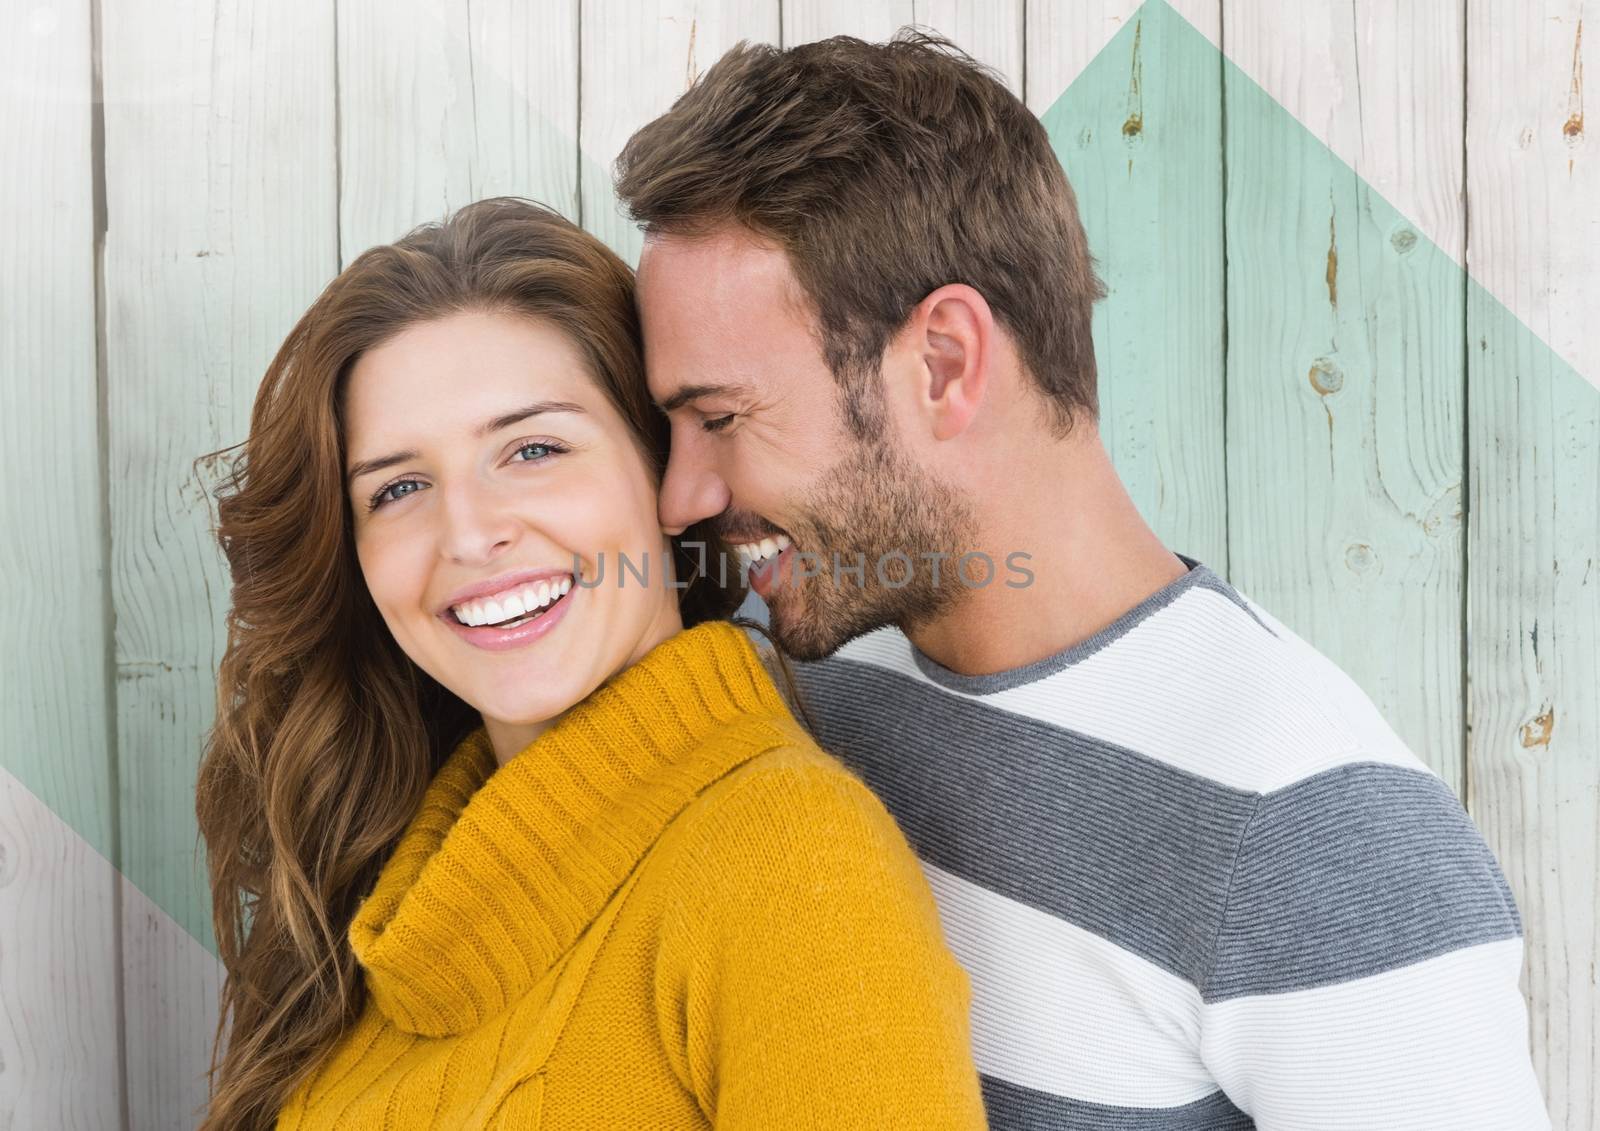 Couple embracing each other against wooden background by Wavebreakmedia